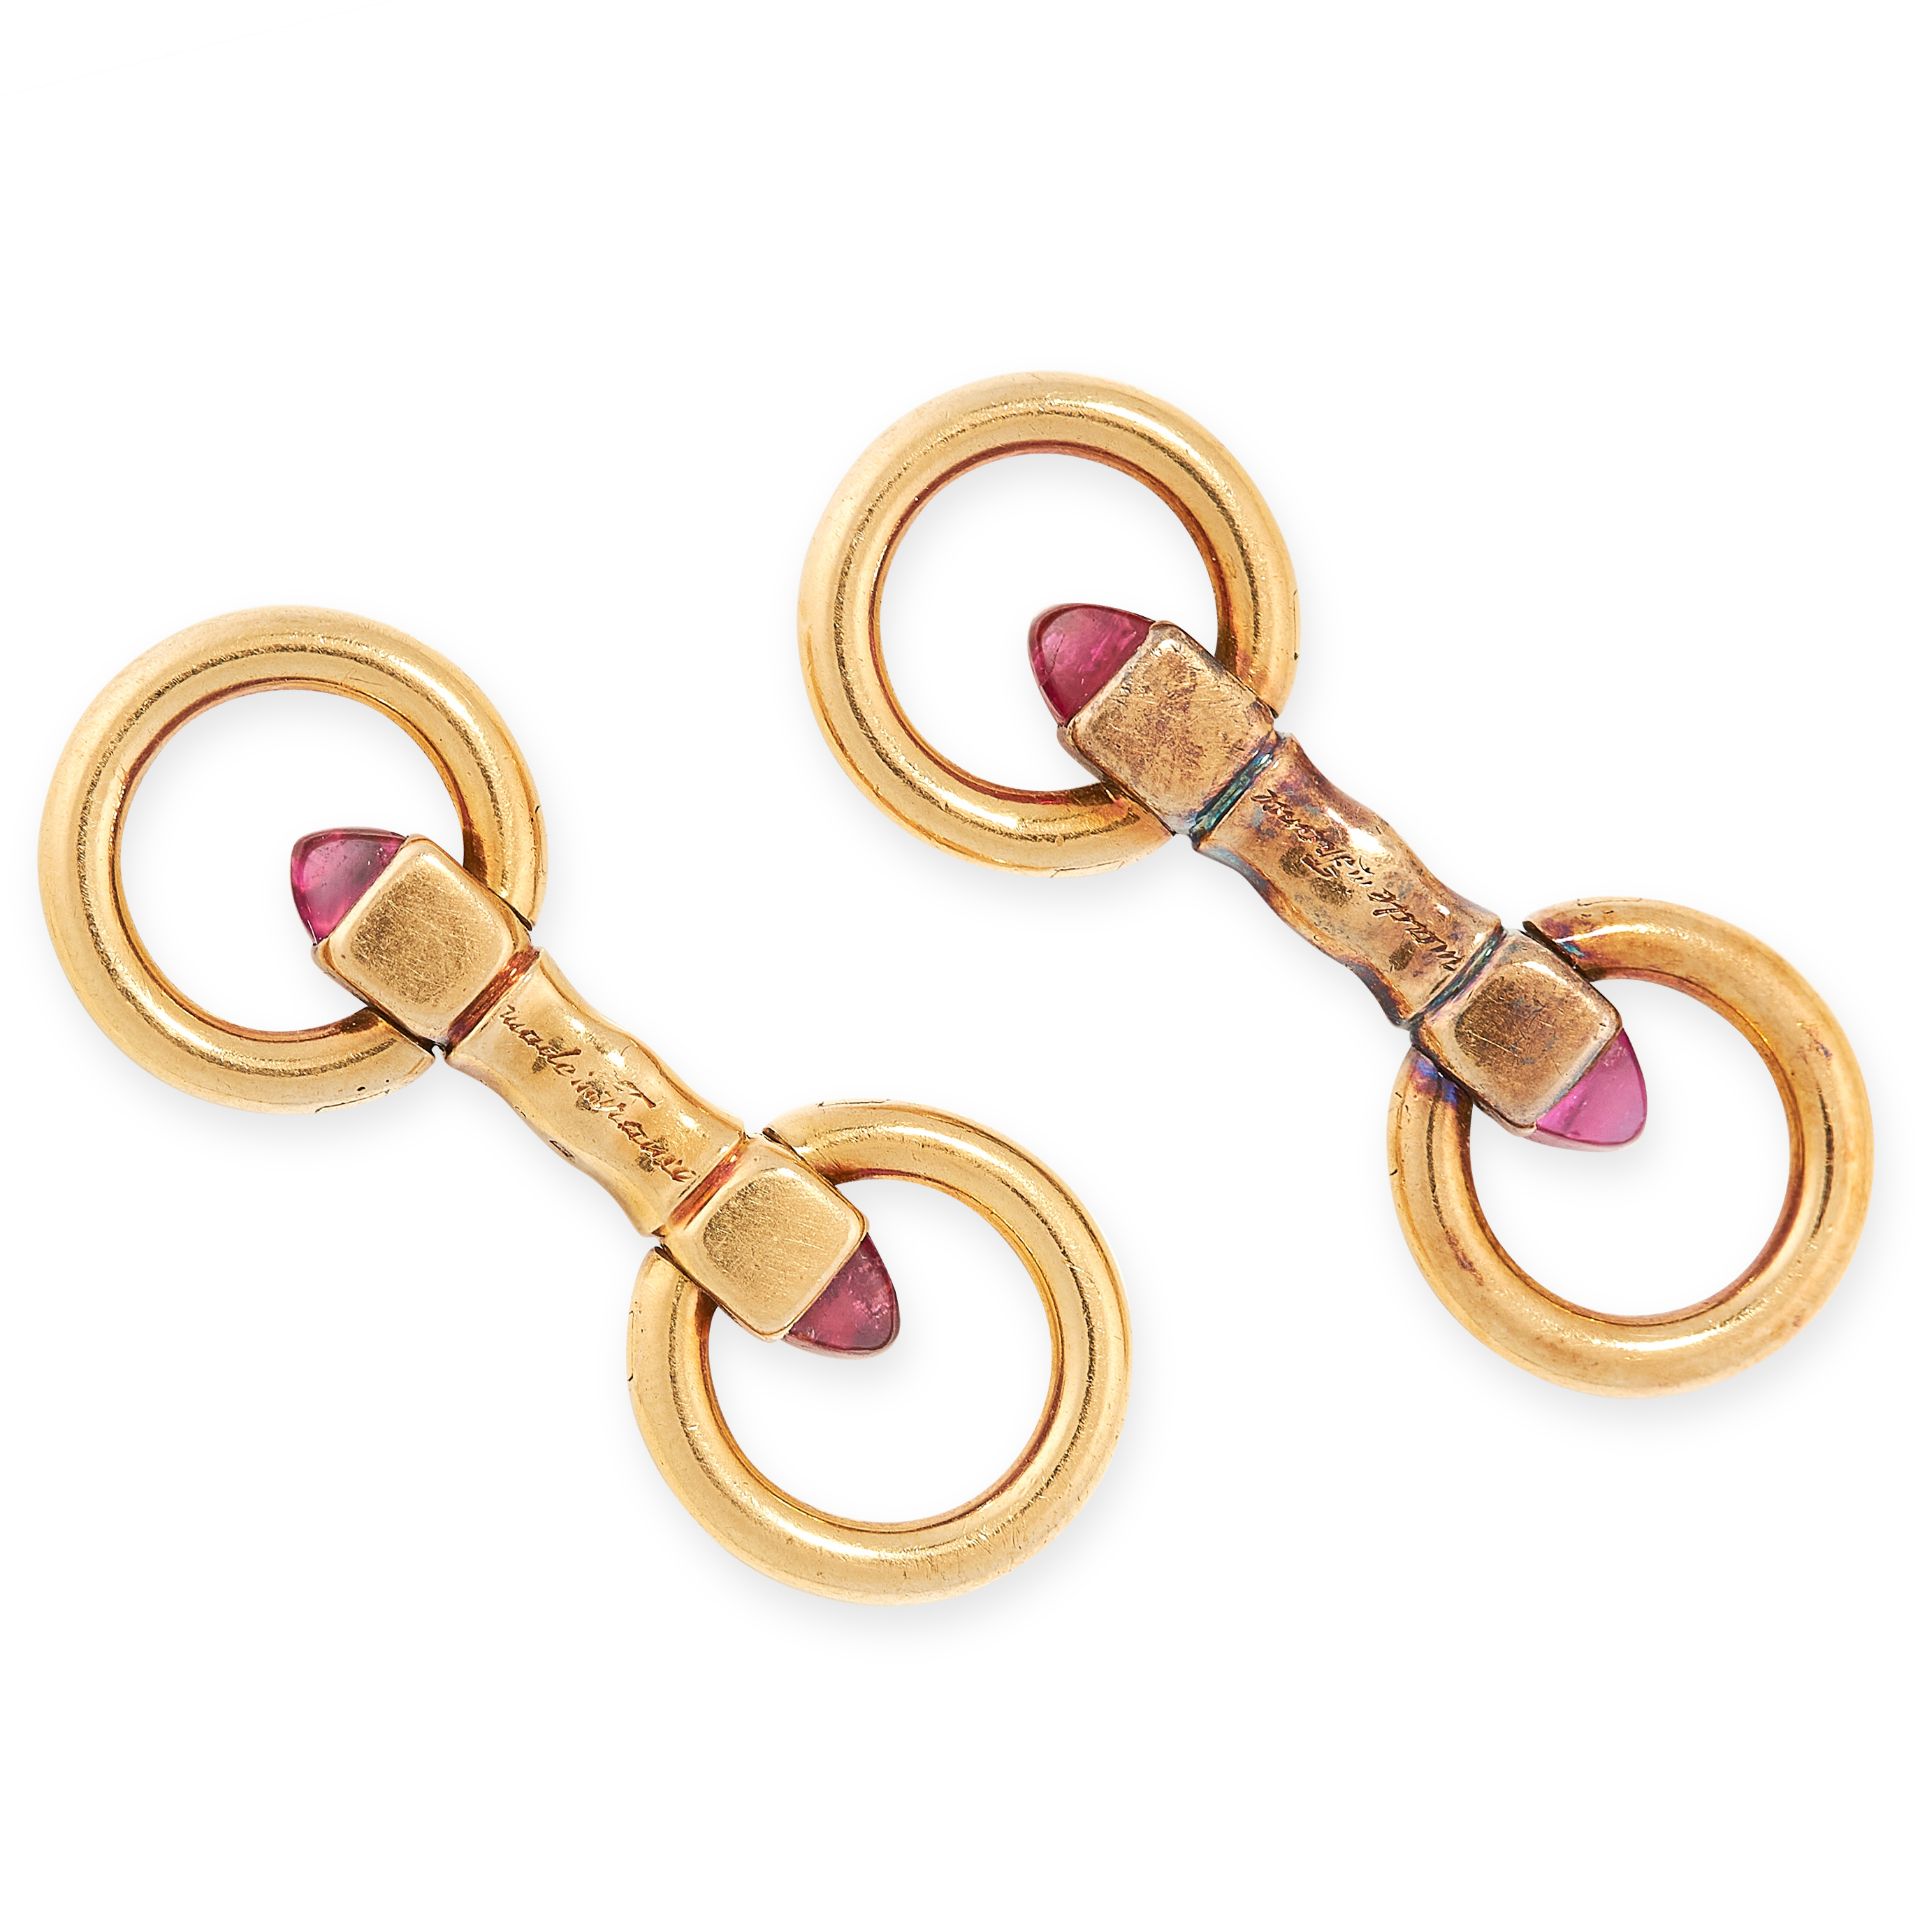 A PAIR OF RUBY CUFFLINKS, CARTIER PARIS CIRCA 1940 in 18ct yellow gold, the central batons set at